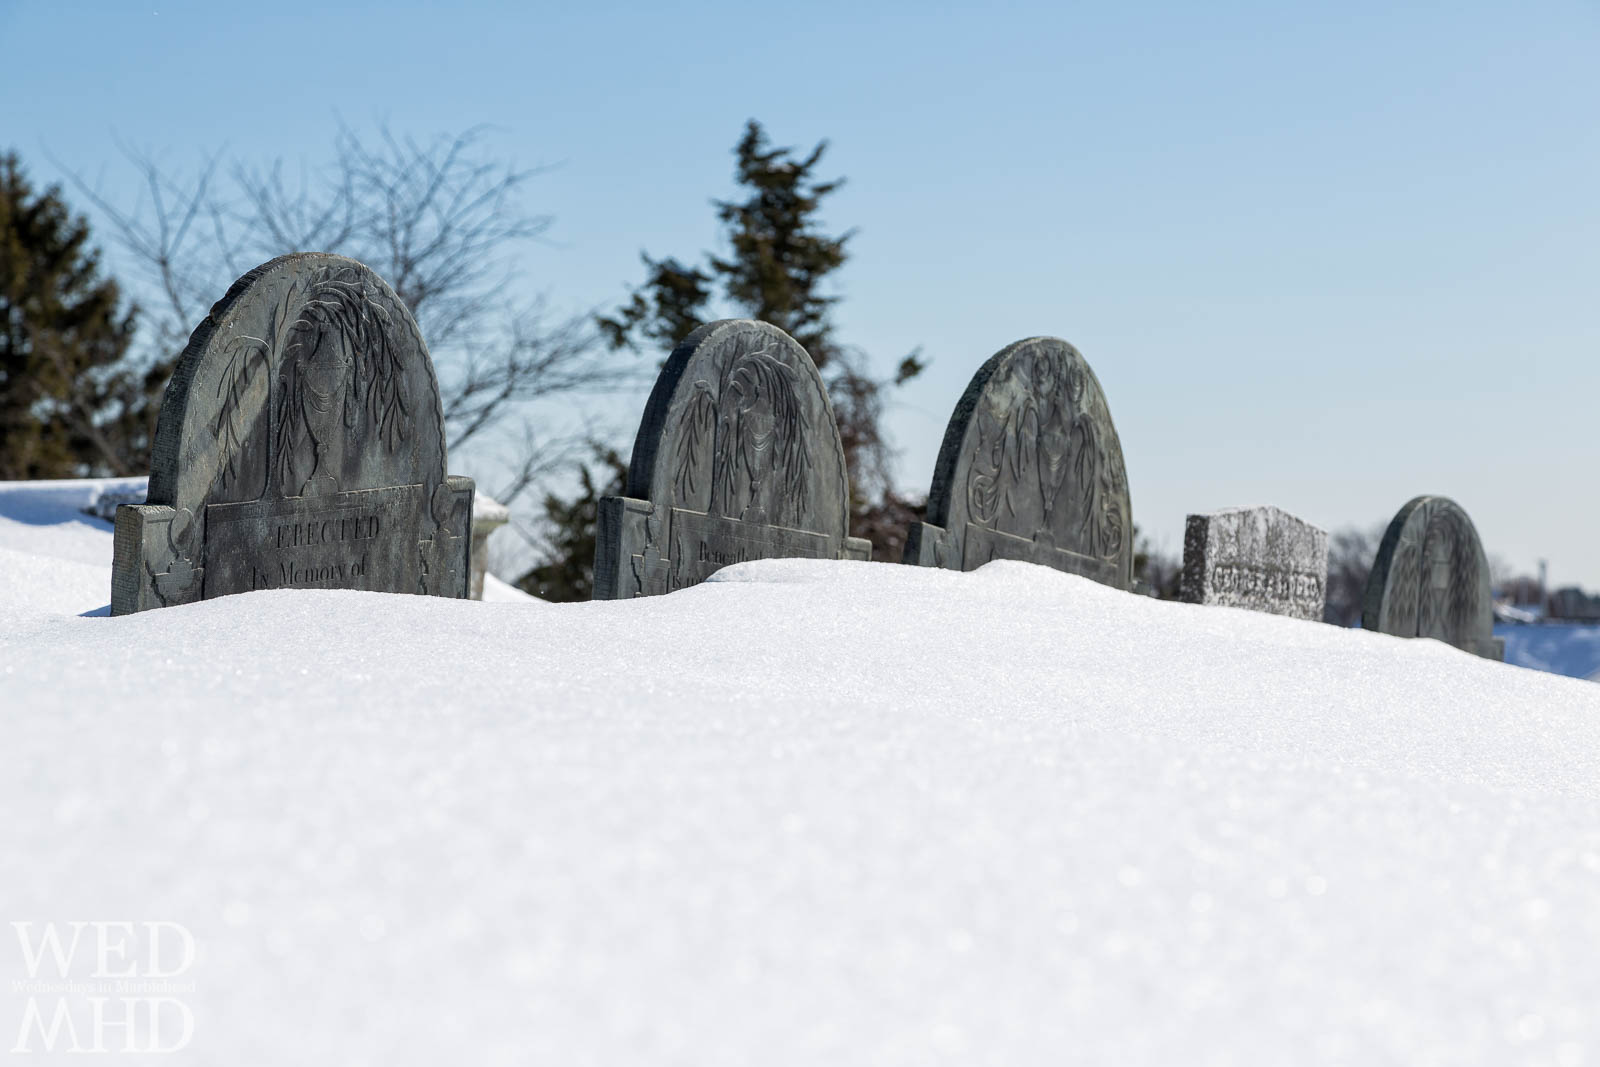 Gravestones serve as snow measuring tools at Old Burial Hill